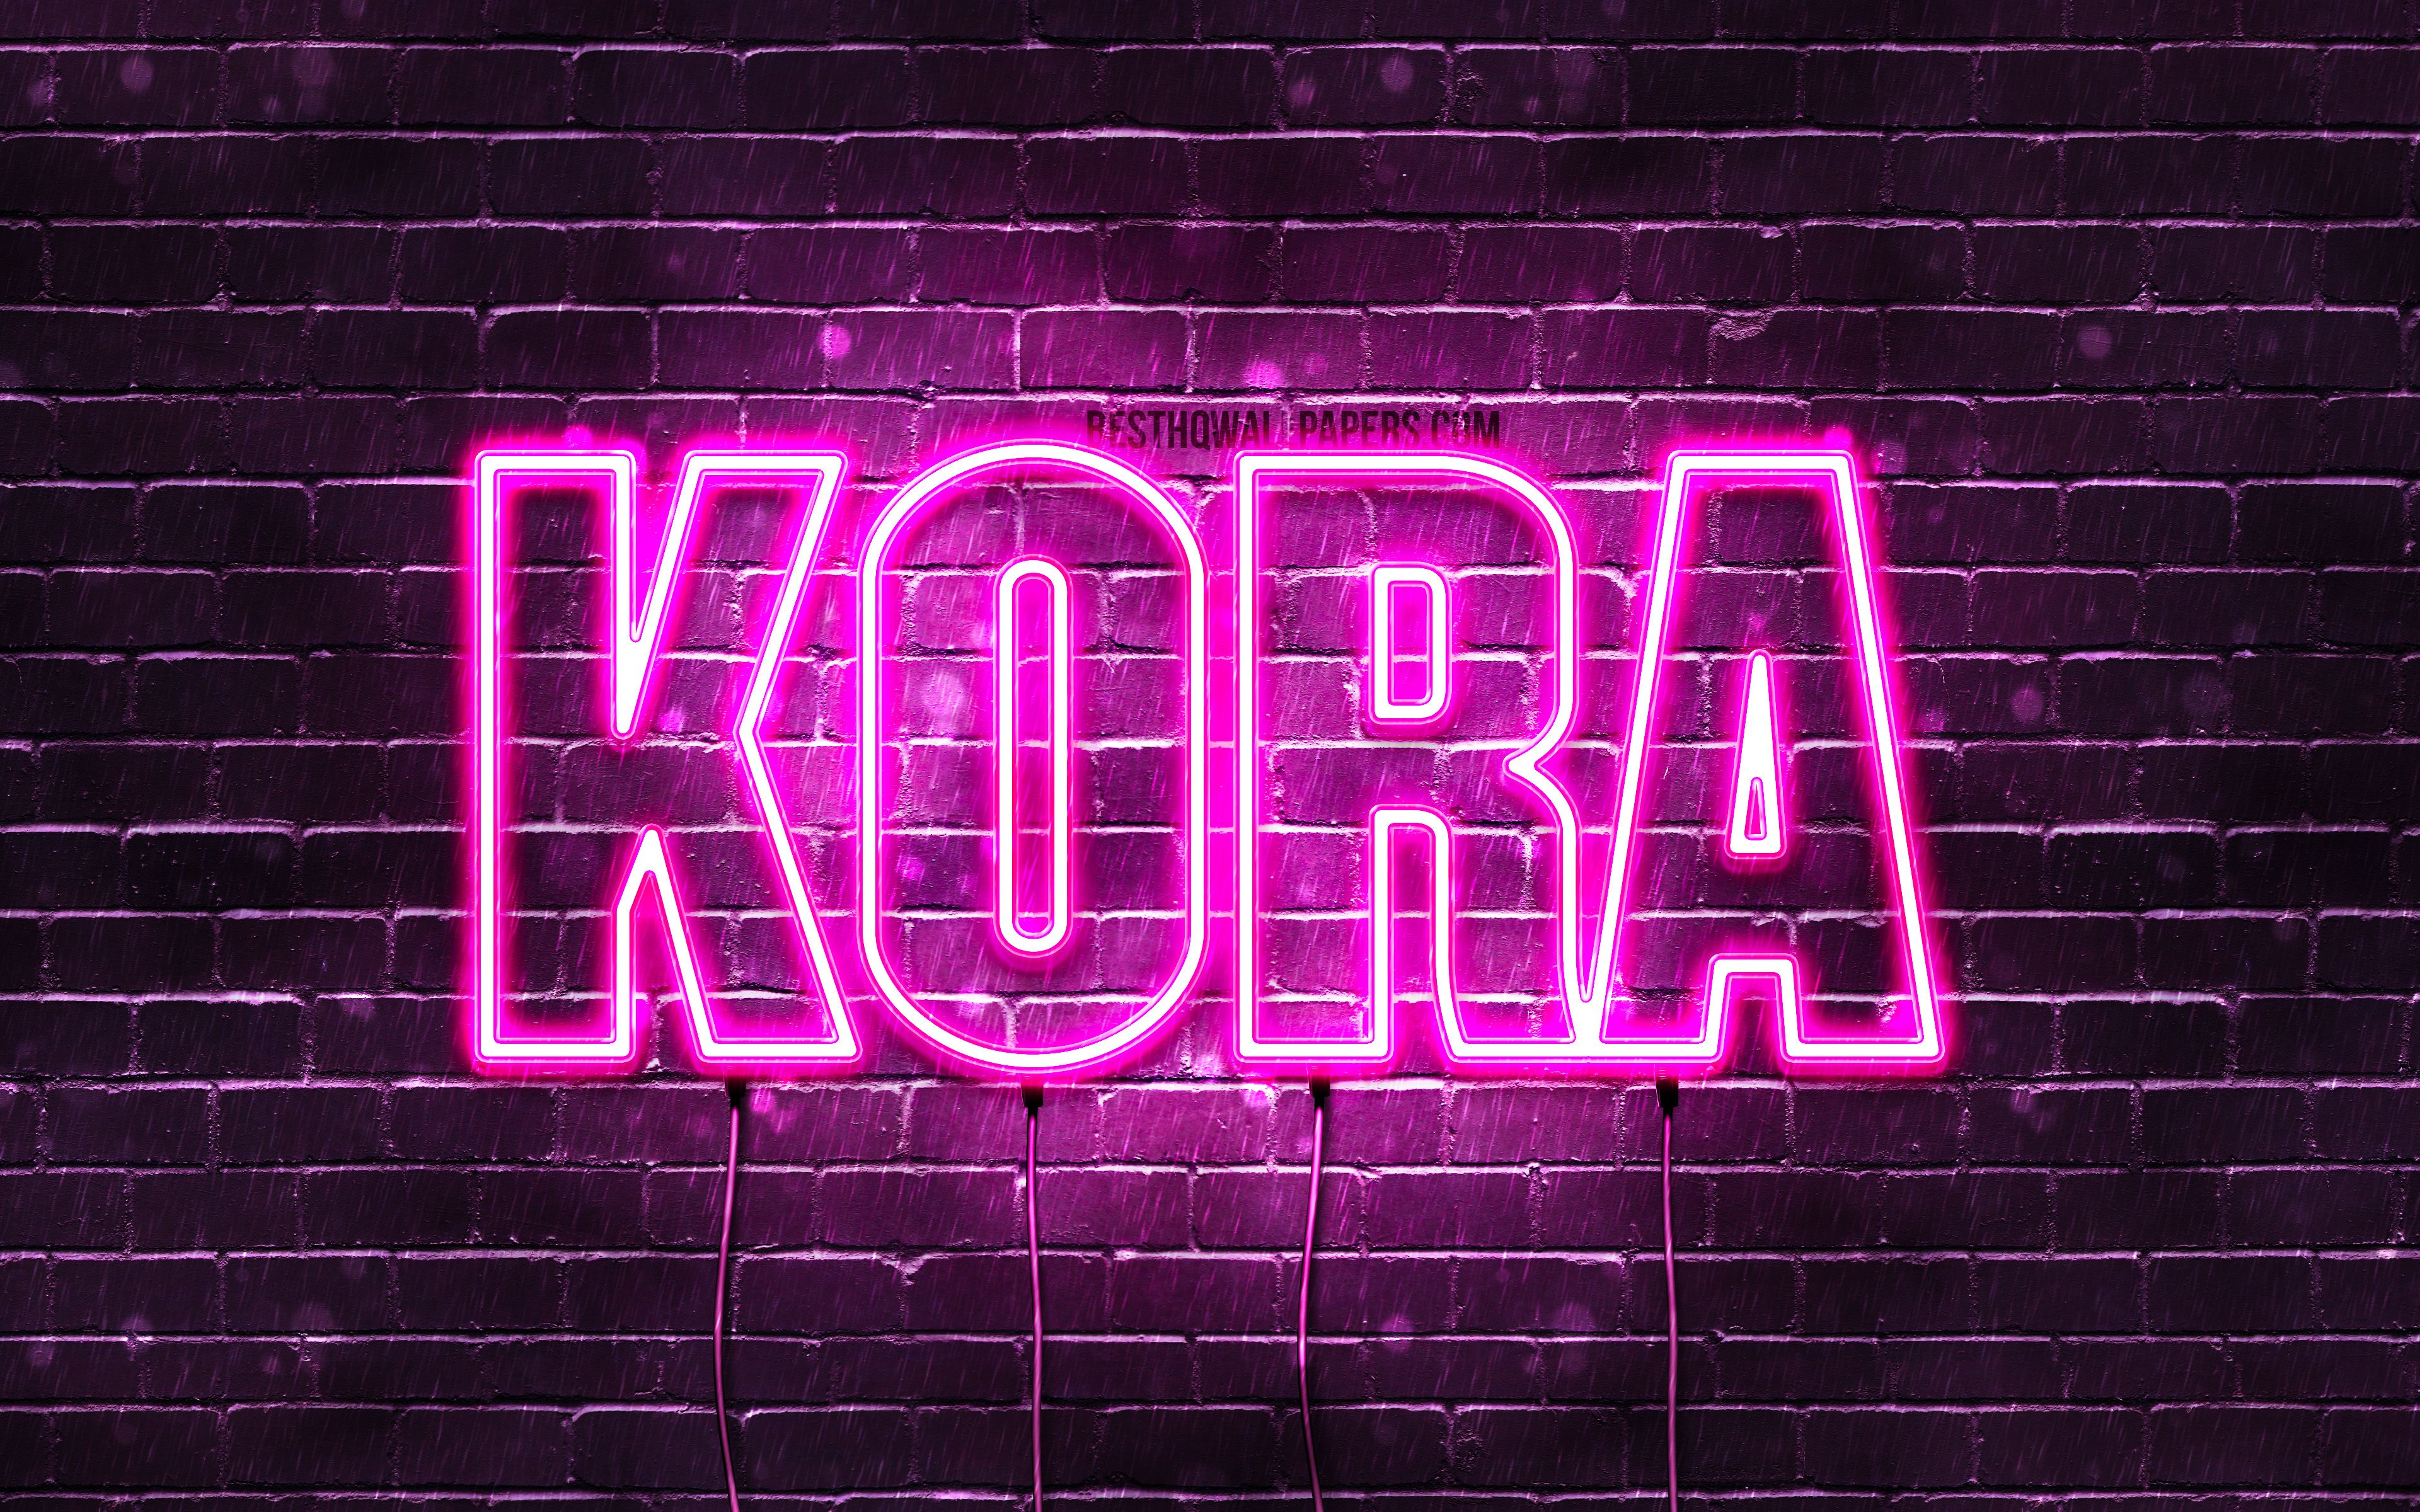 Download wallpaper Kora, 4k, wallpaper with names, female names, Kora name, purple neon lights, horizontal text, picture with Kora name for desktop with resolution 3840x2400. High Quality HD picture wallpaper